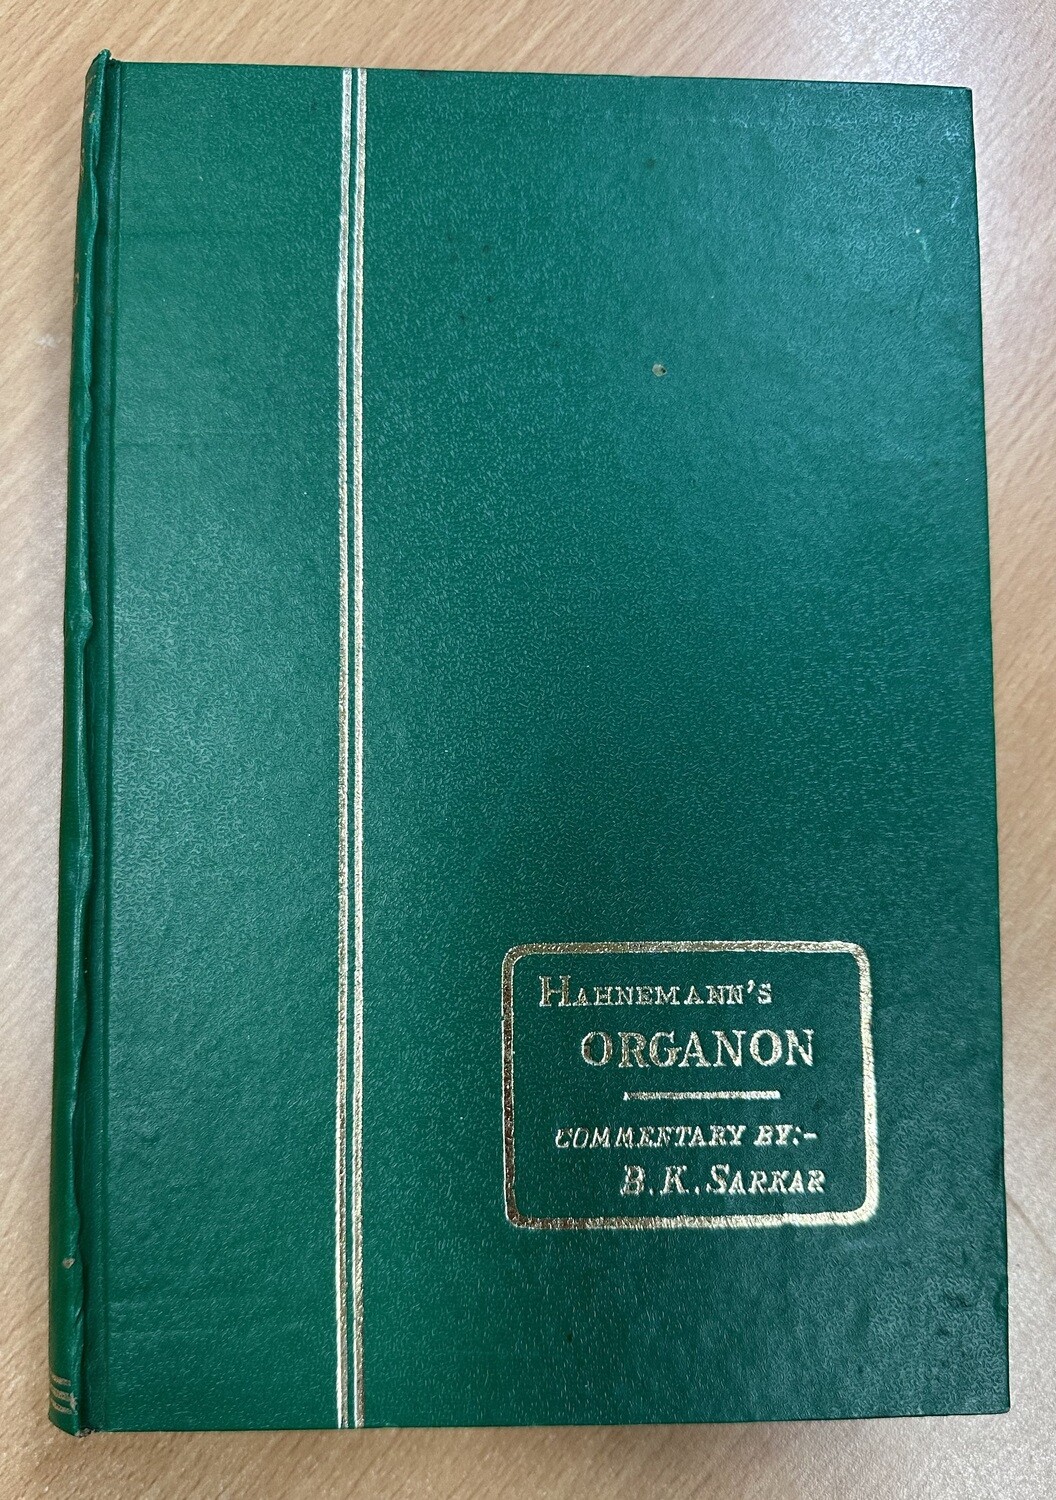 Organon of Medicine (fifth & sixth edition) - commentary by Sarkar ​